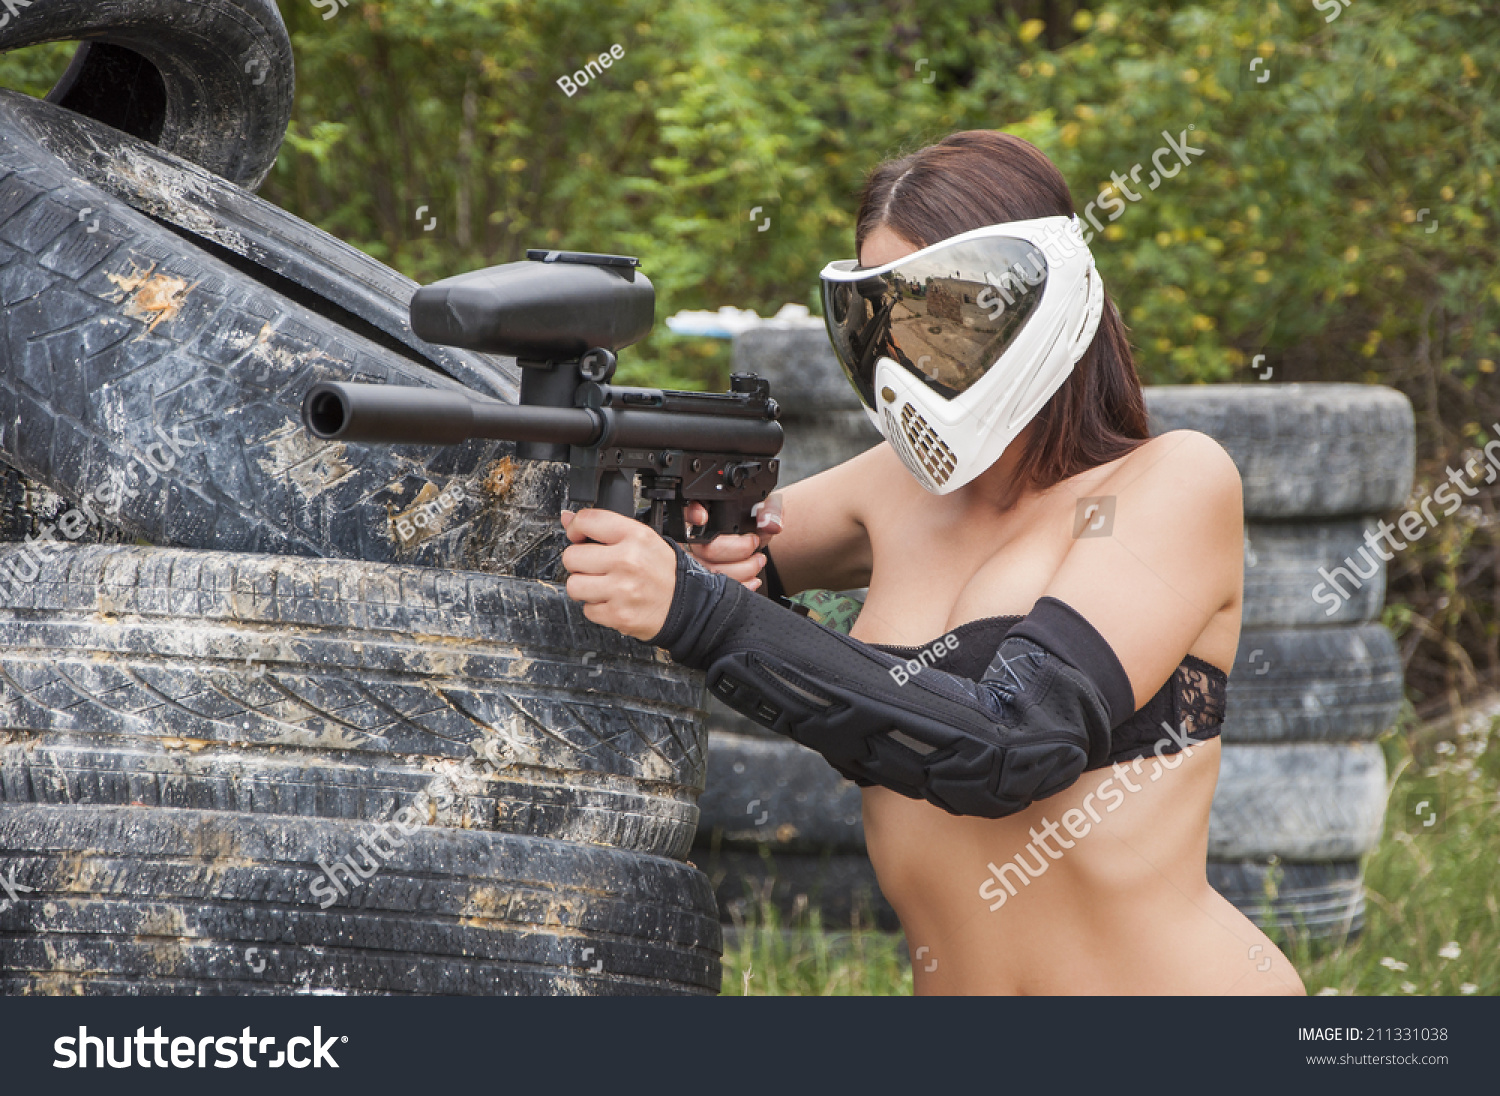 Girls narked with paintball guns